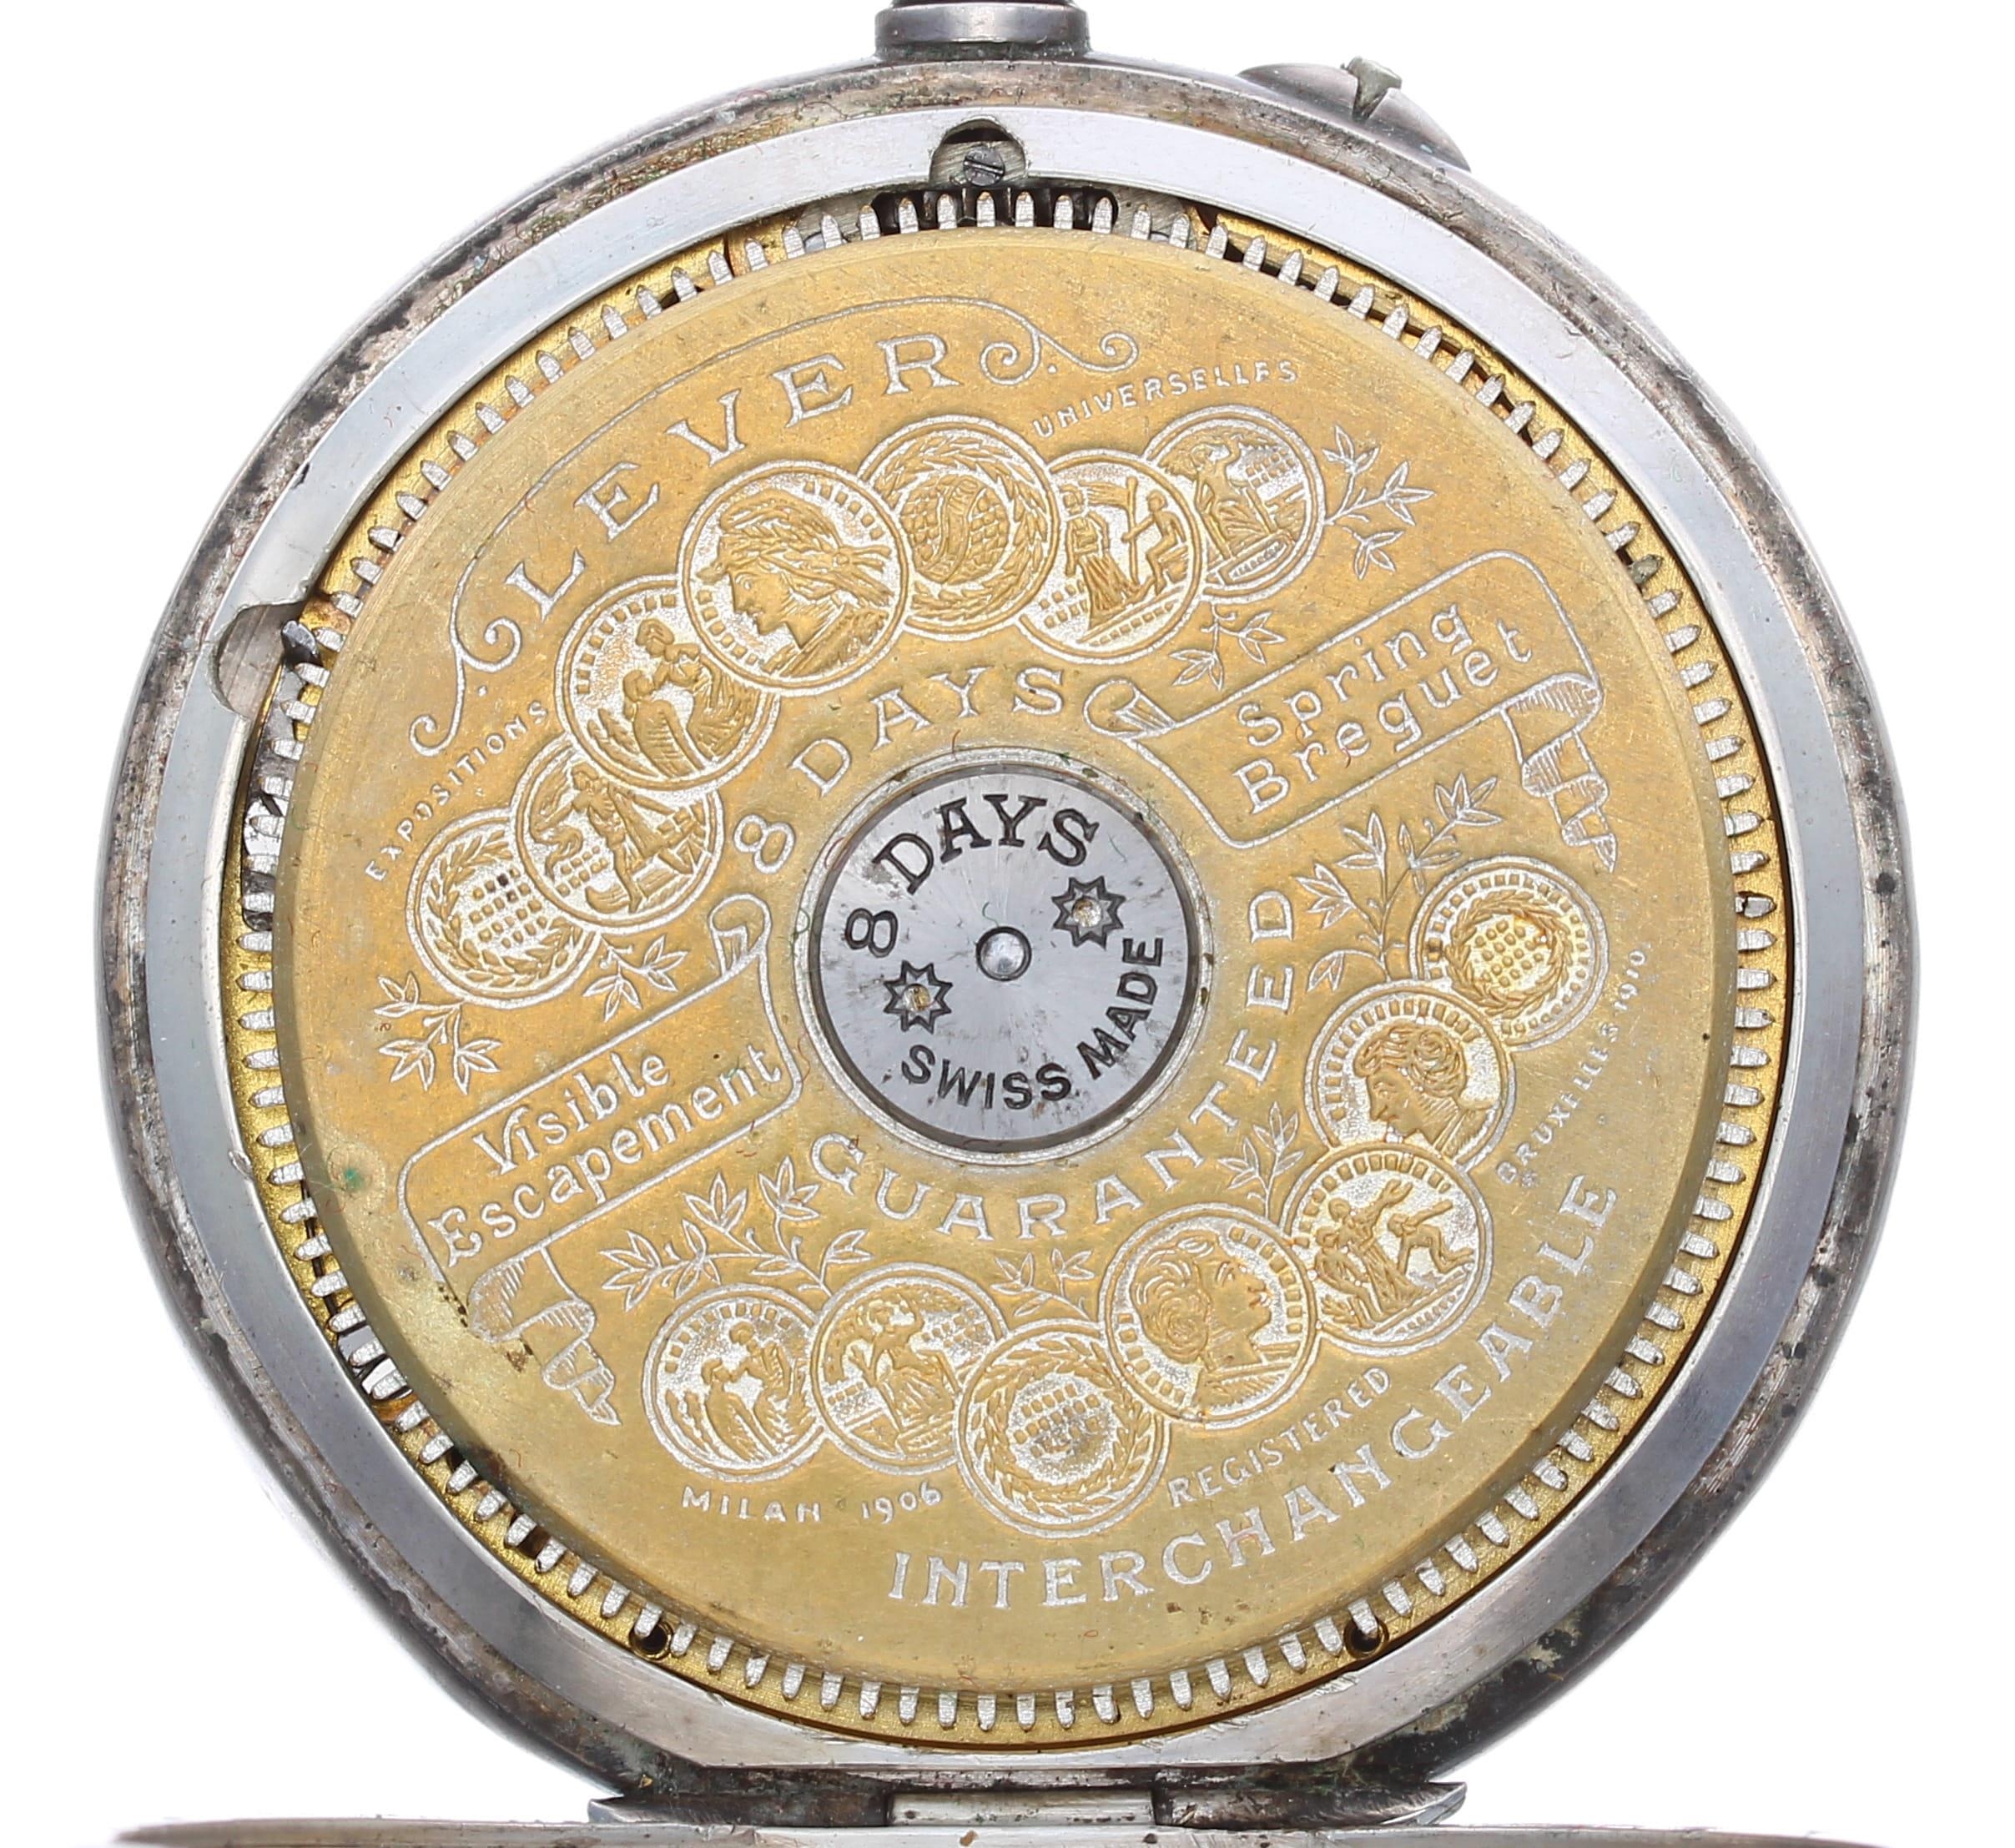 Hebdomas Patent 8 days silver pocket watch, import hallmarks London 1912, the decorated dial with - Image 3 of 4